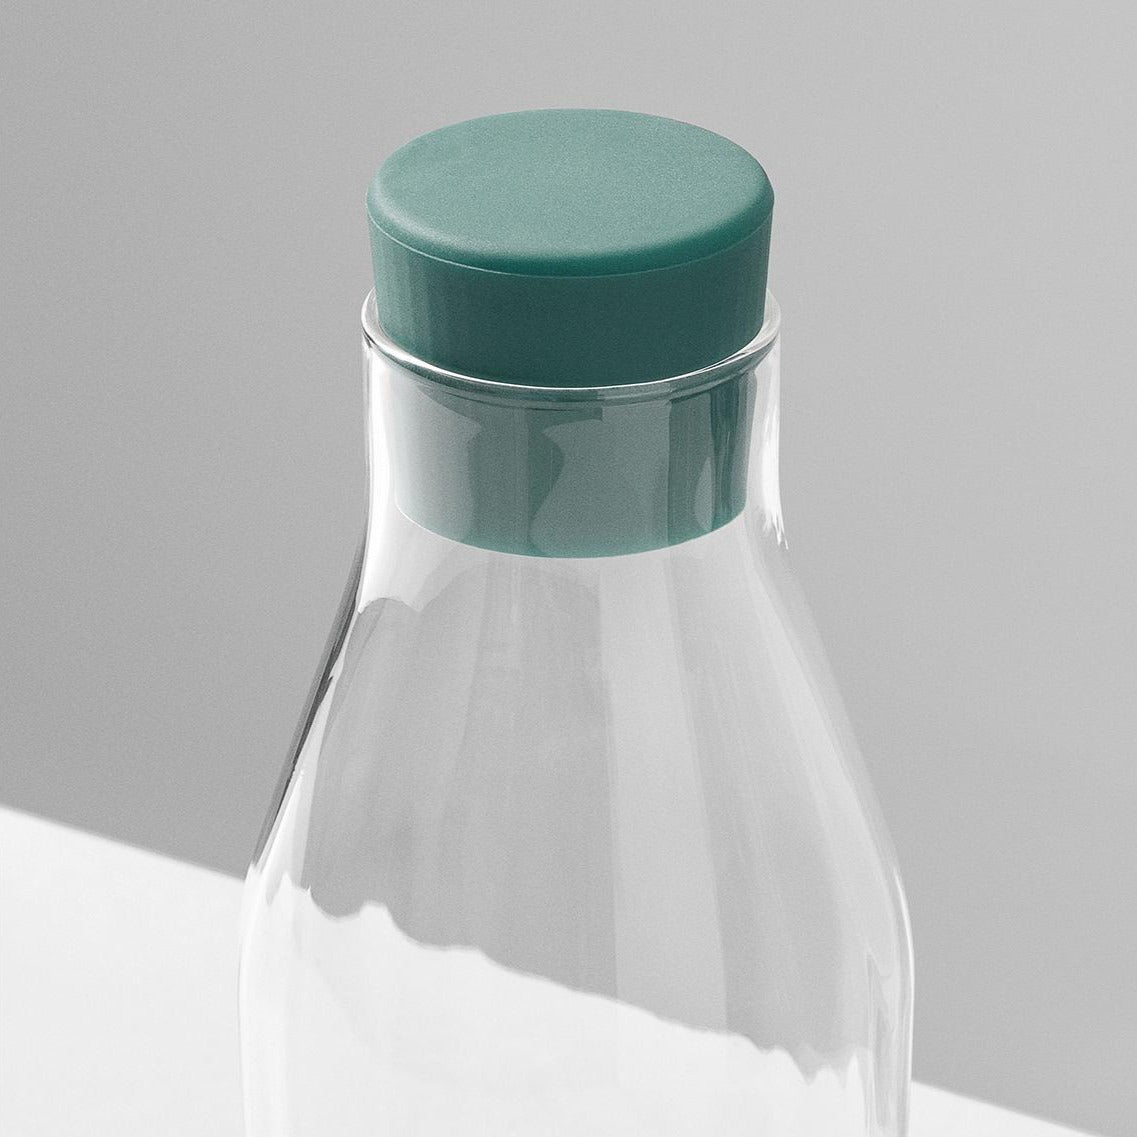 Yod and Co Rivington glass carafes design by Blond design studio